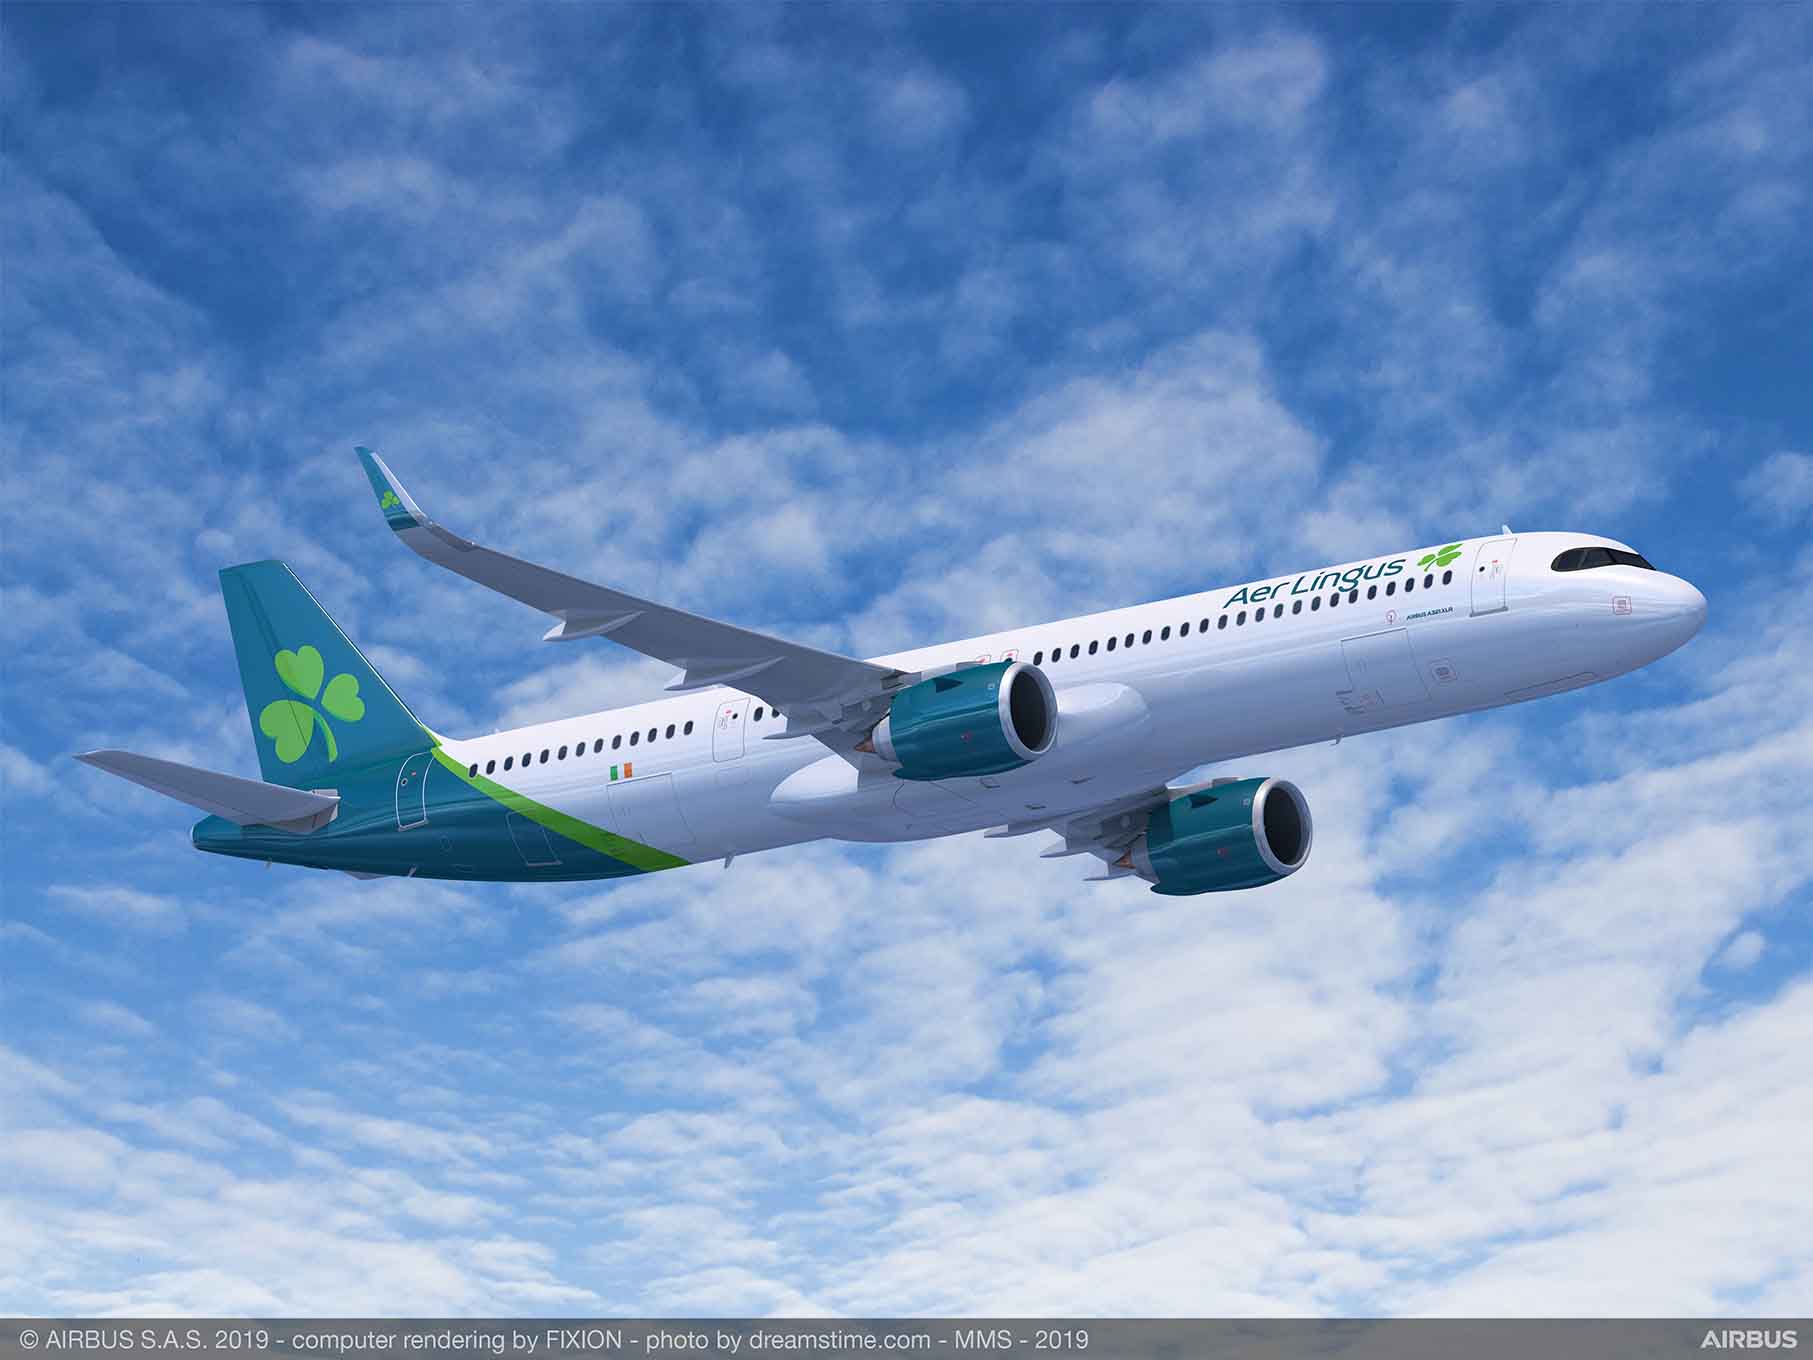 IAG takes 14 A321 XLRs destined for Iberia and Aer Lingus